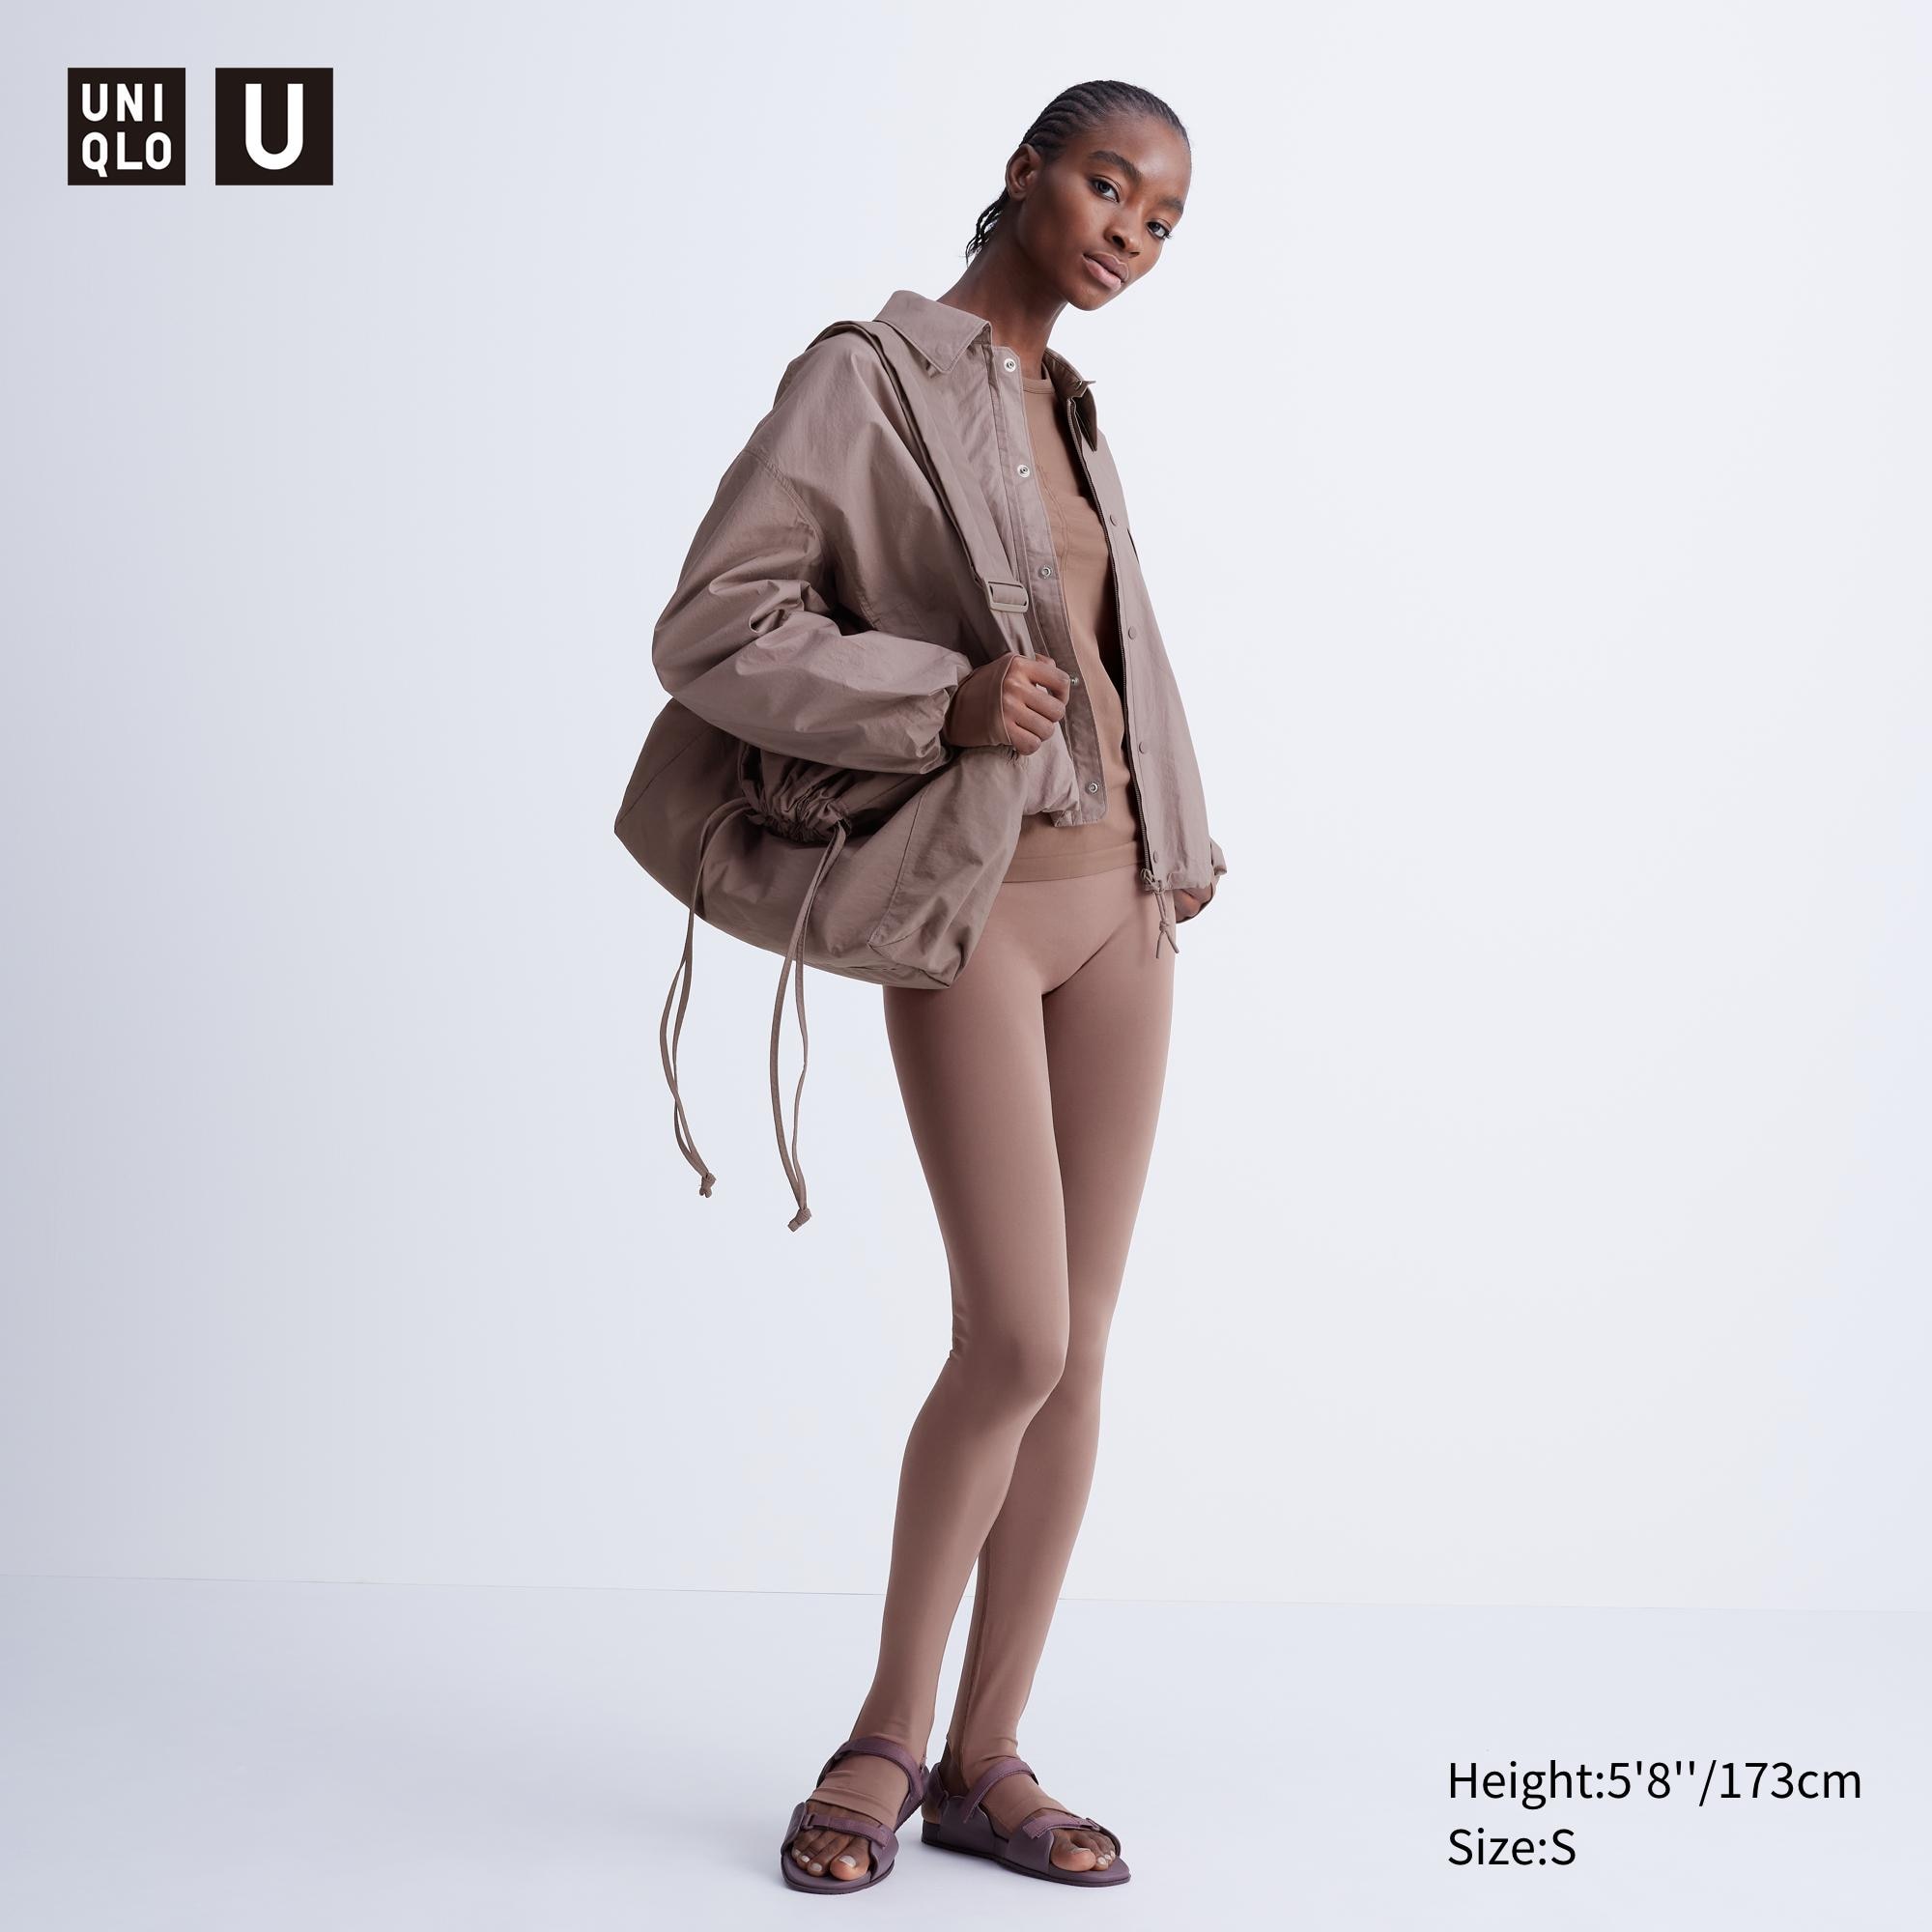 UNIQLO USA - Pair our AIRism Leggings with a Satin Bomber Jacket for an  athleisure look that's ready for anything.